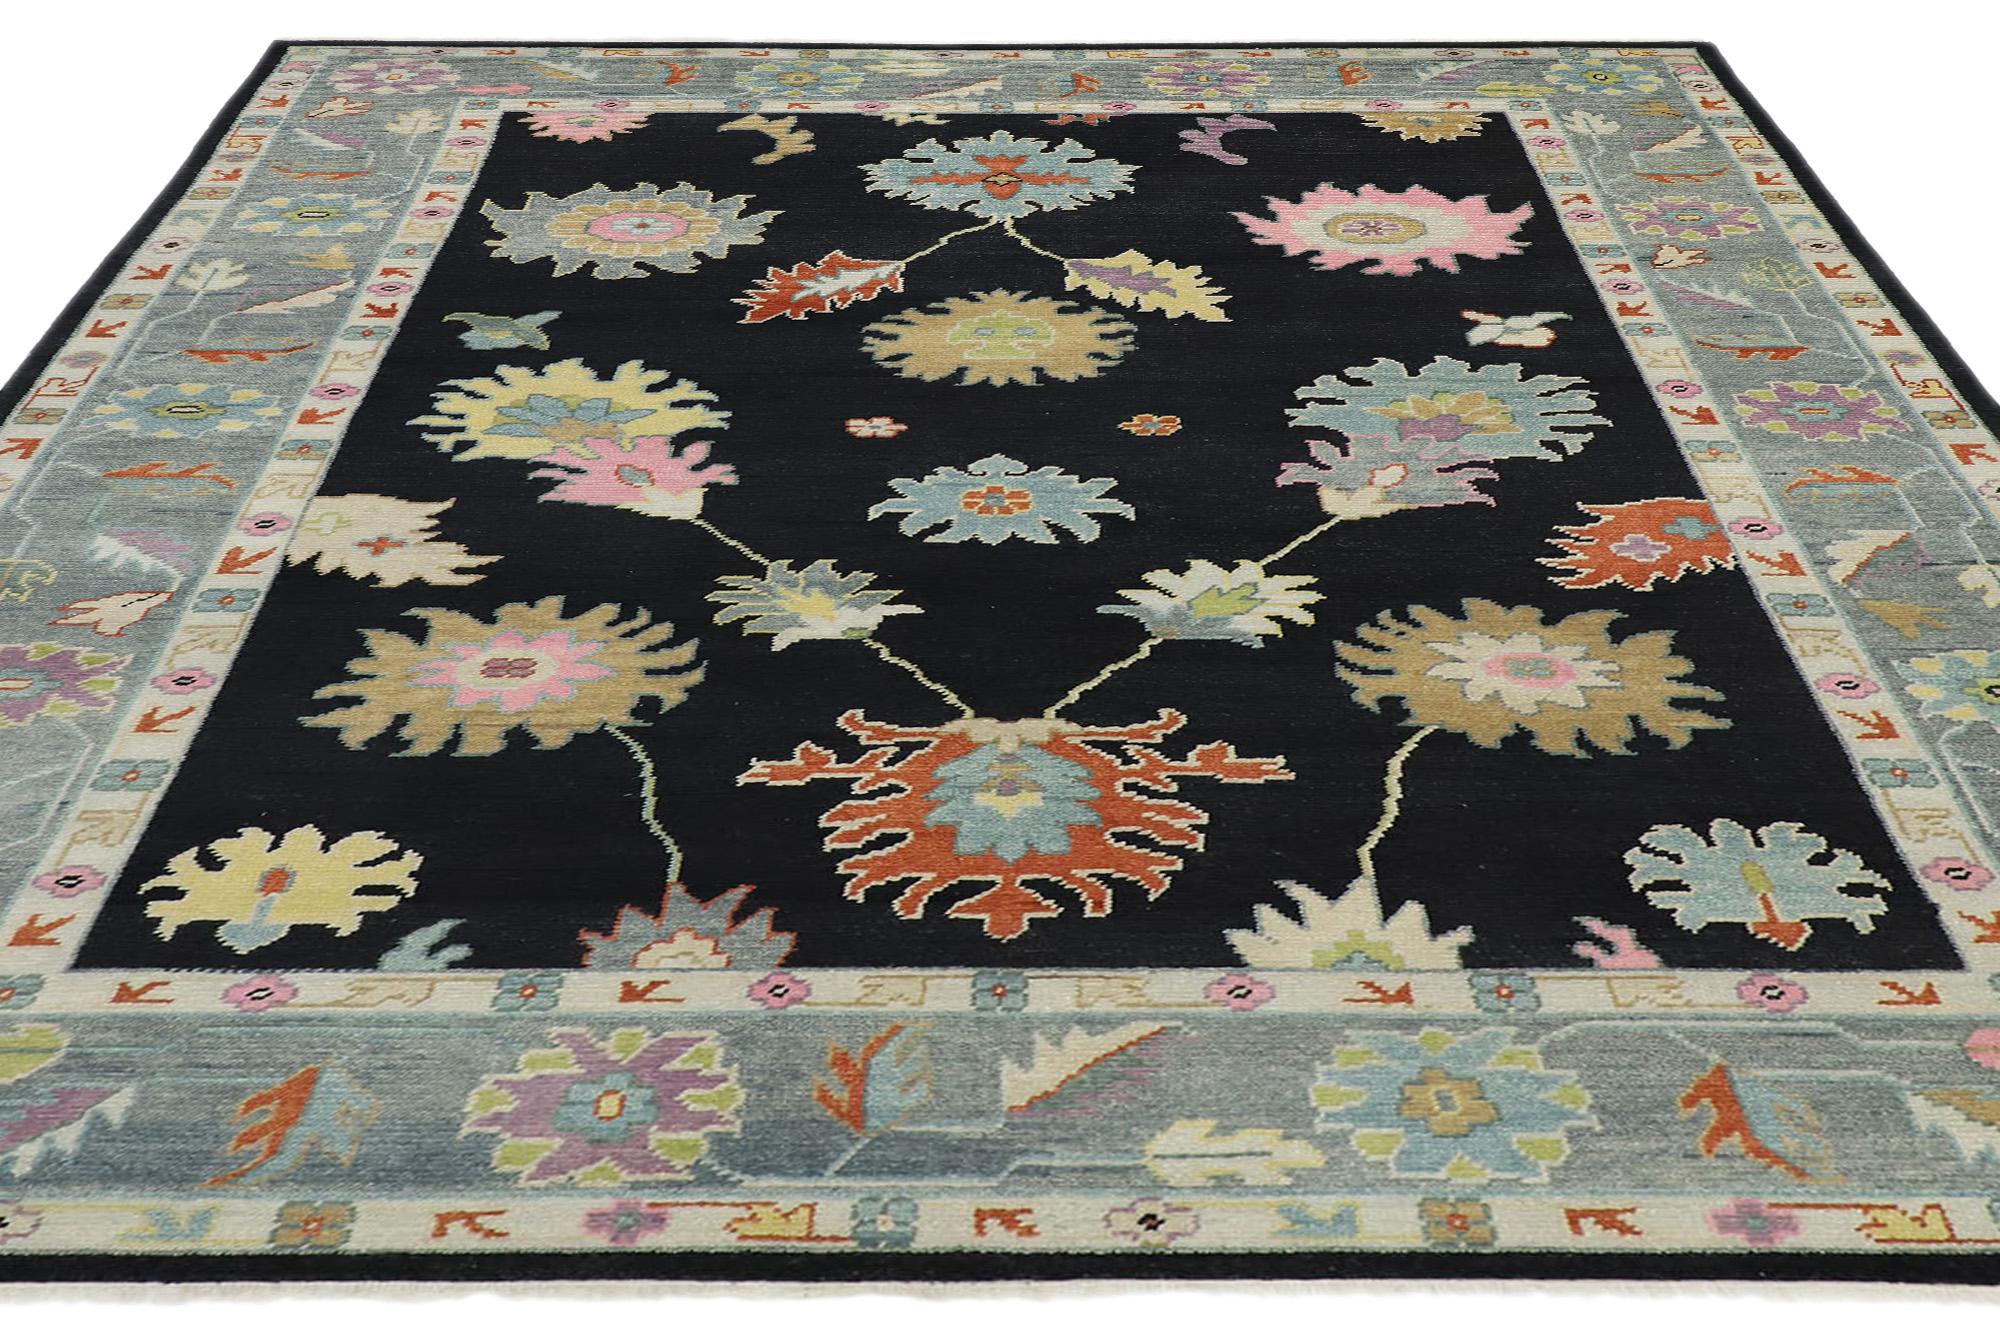 New Contemporary Colorful Oushak Rug (Indisch) im Angebot